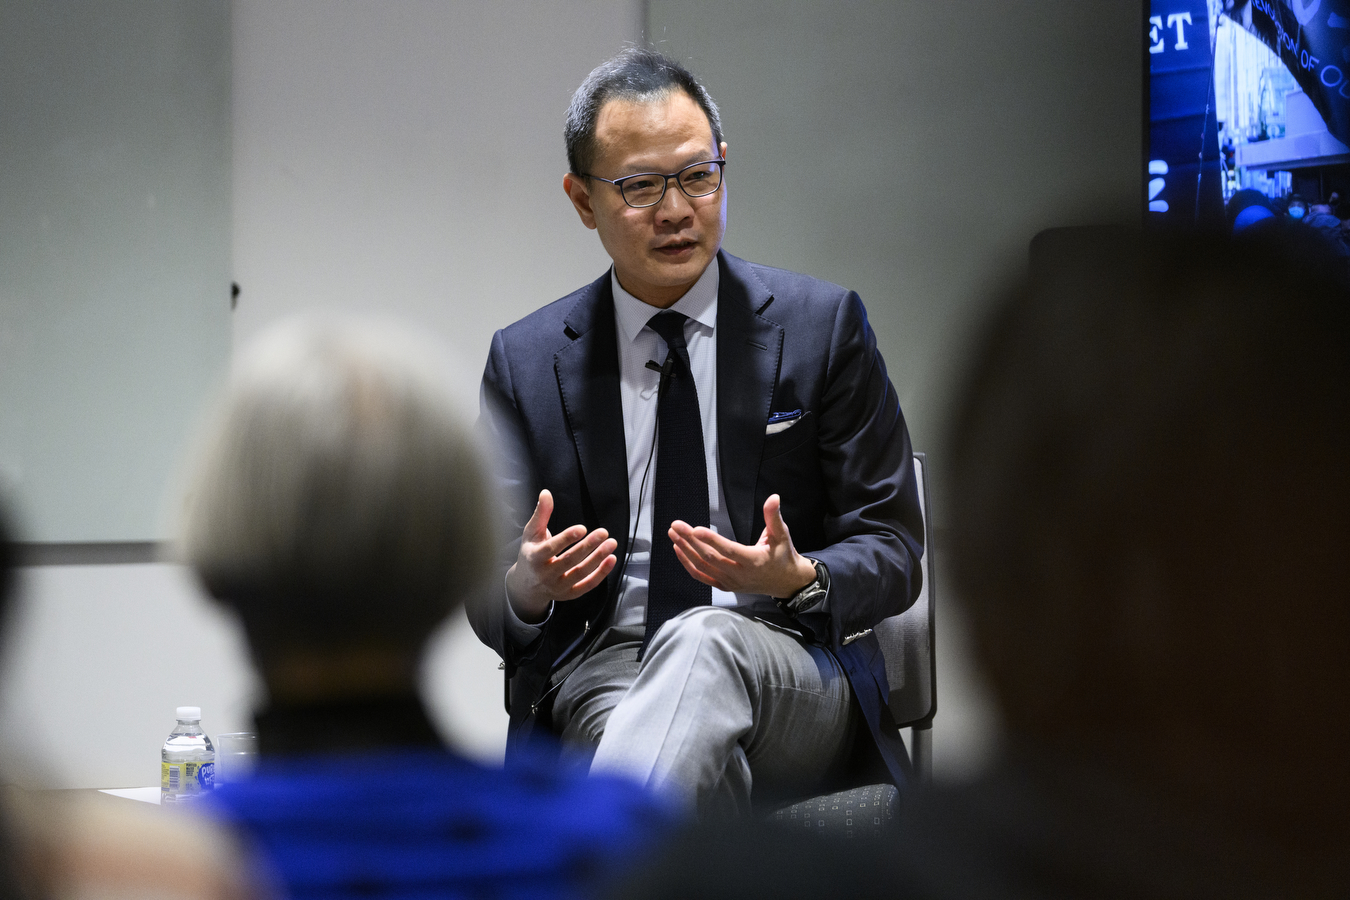 Dennis Kwok speaking at a panel discussion